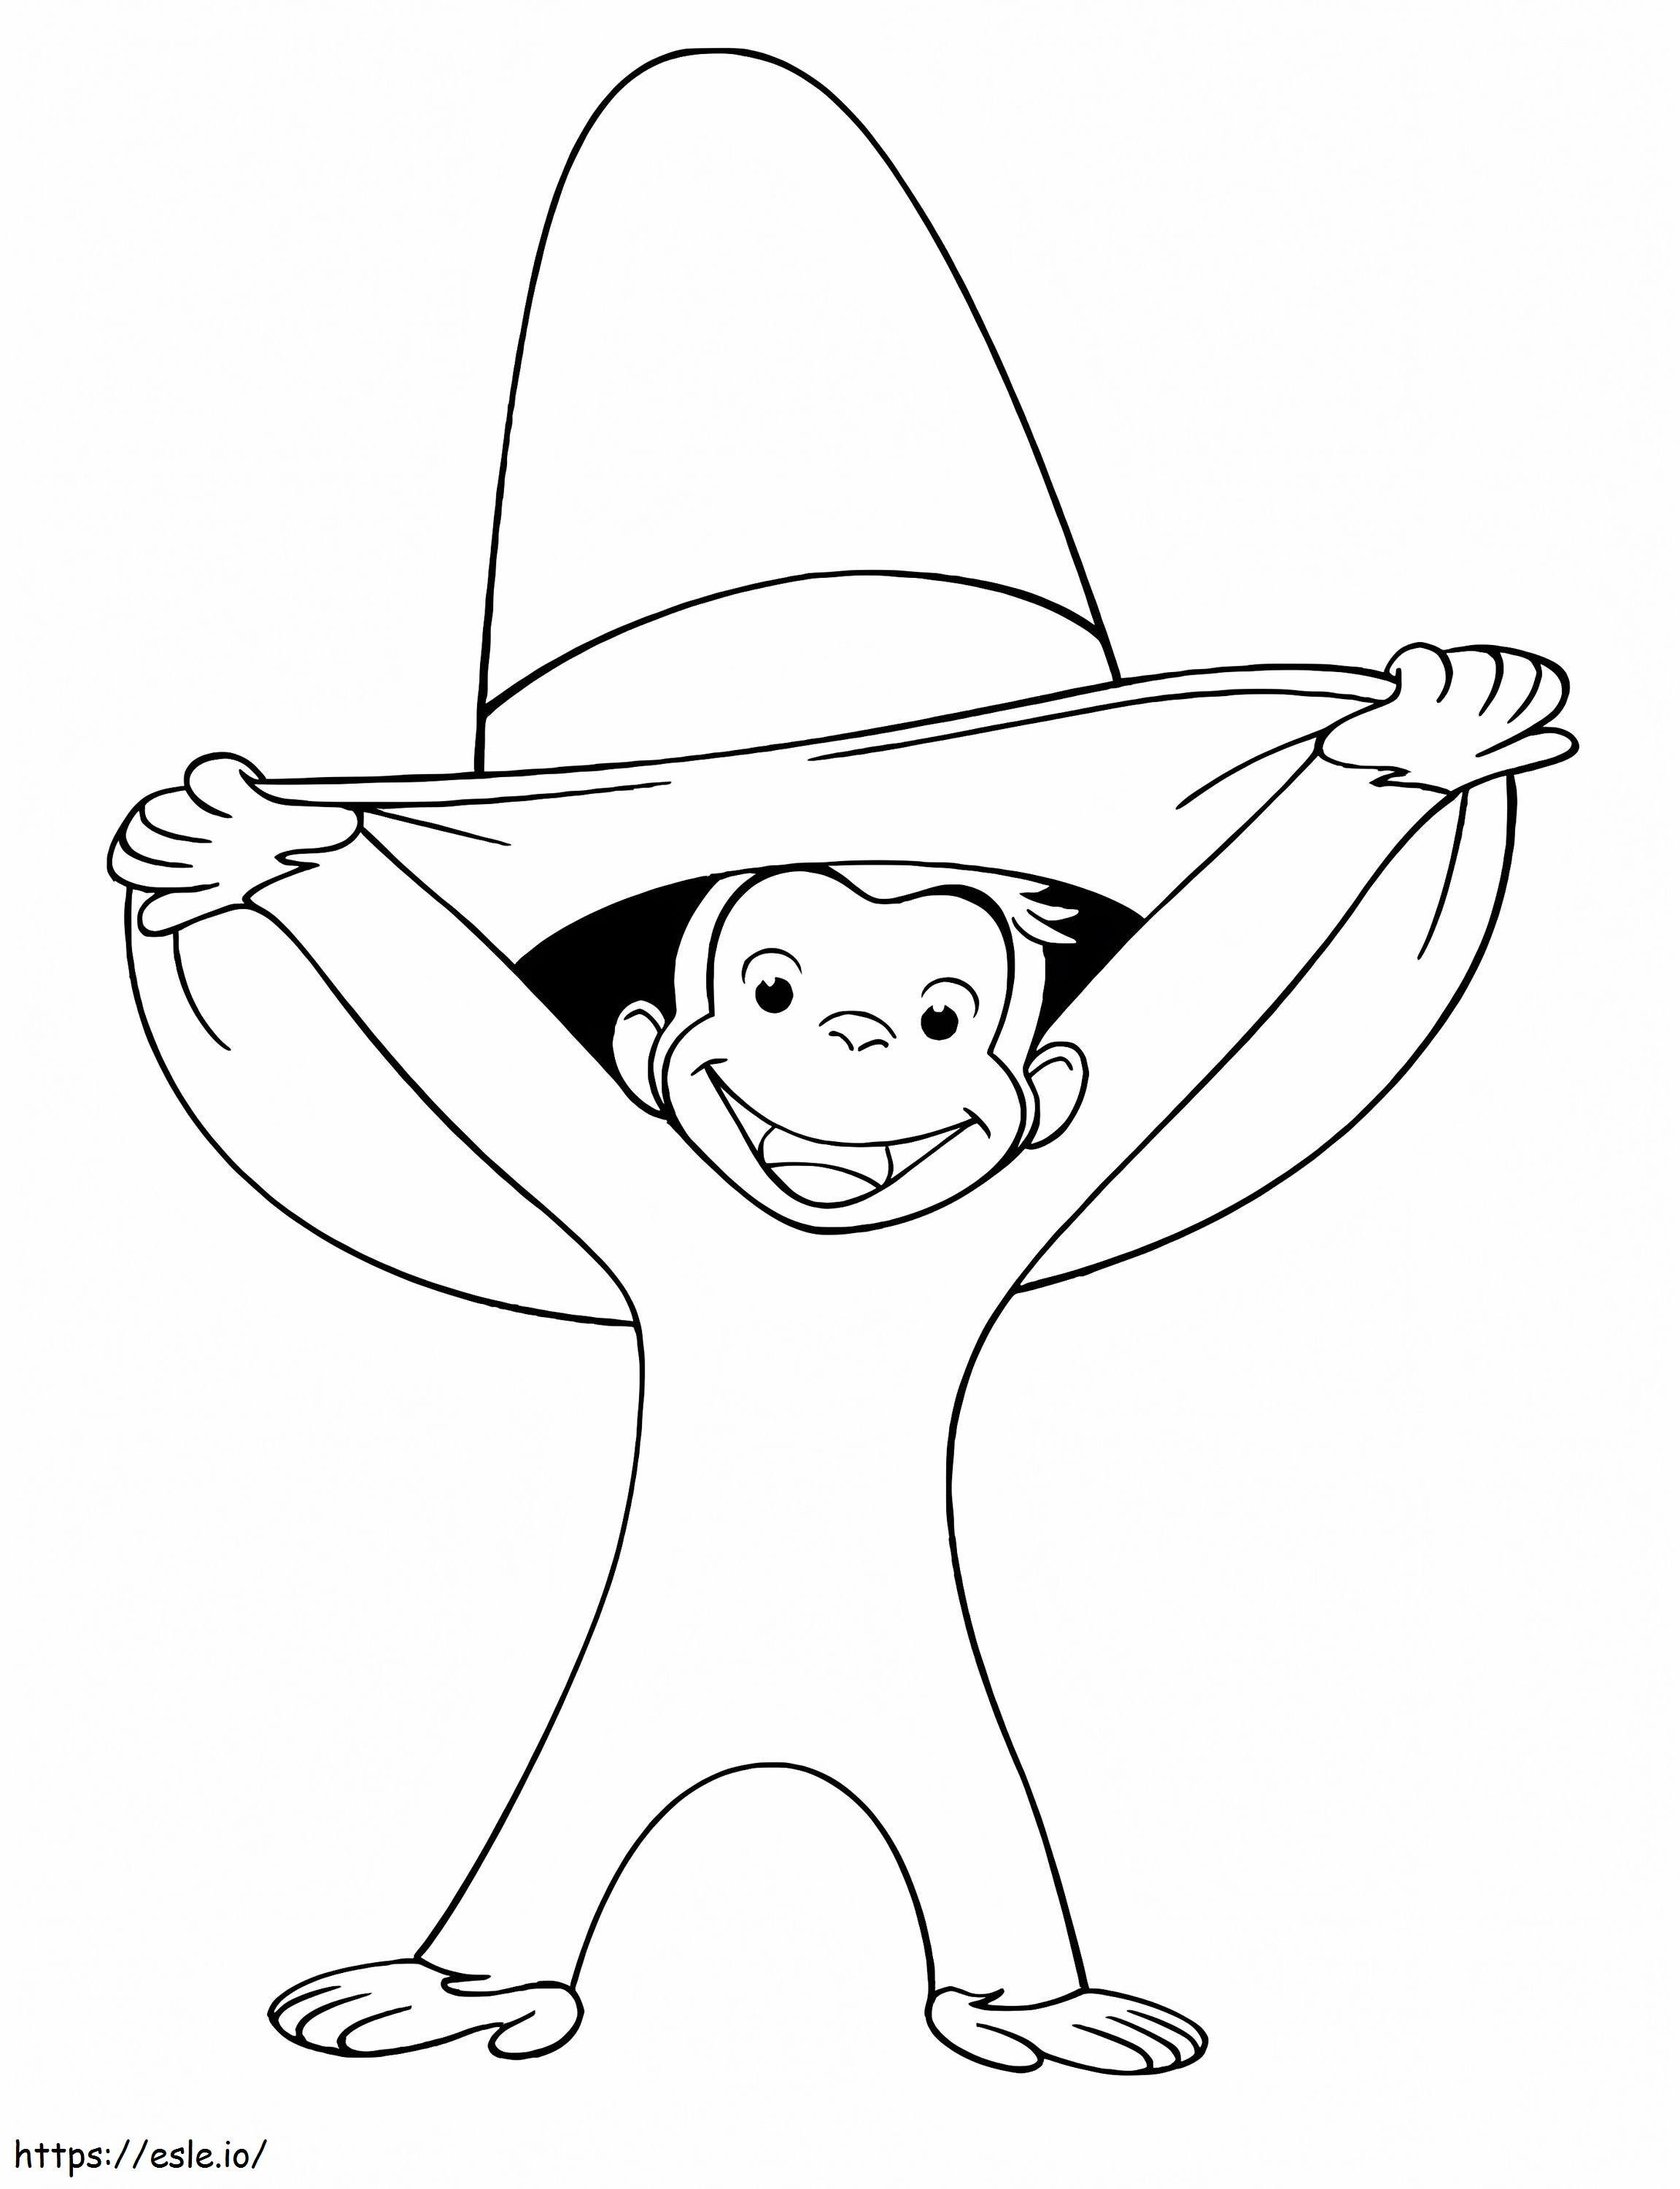 Happy Monkey Holding Big Hat coloring page